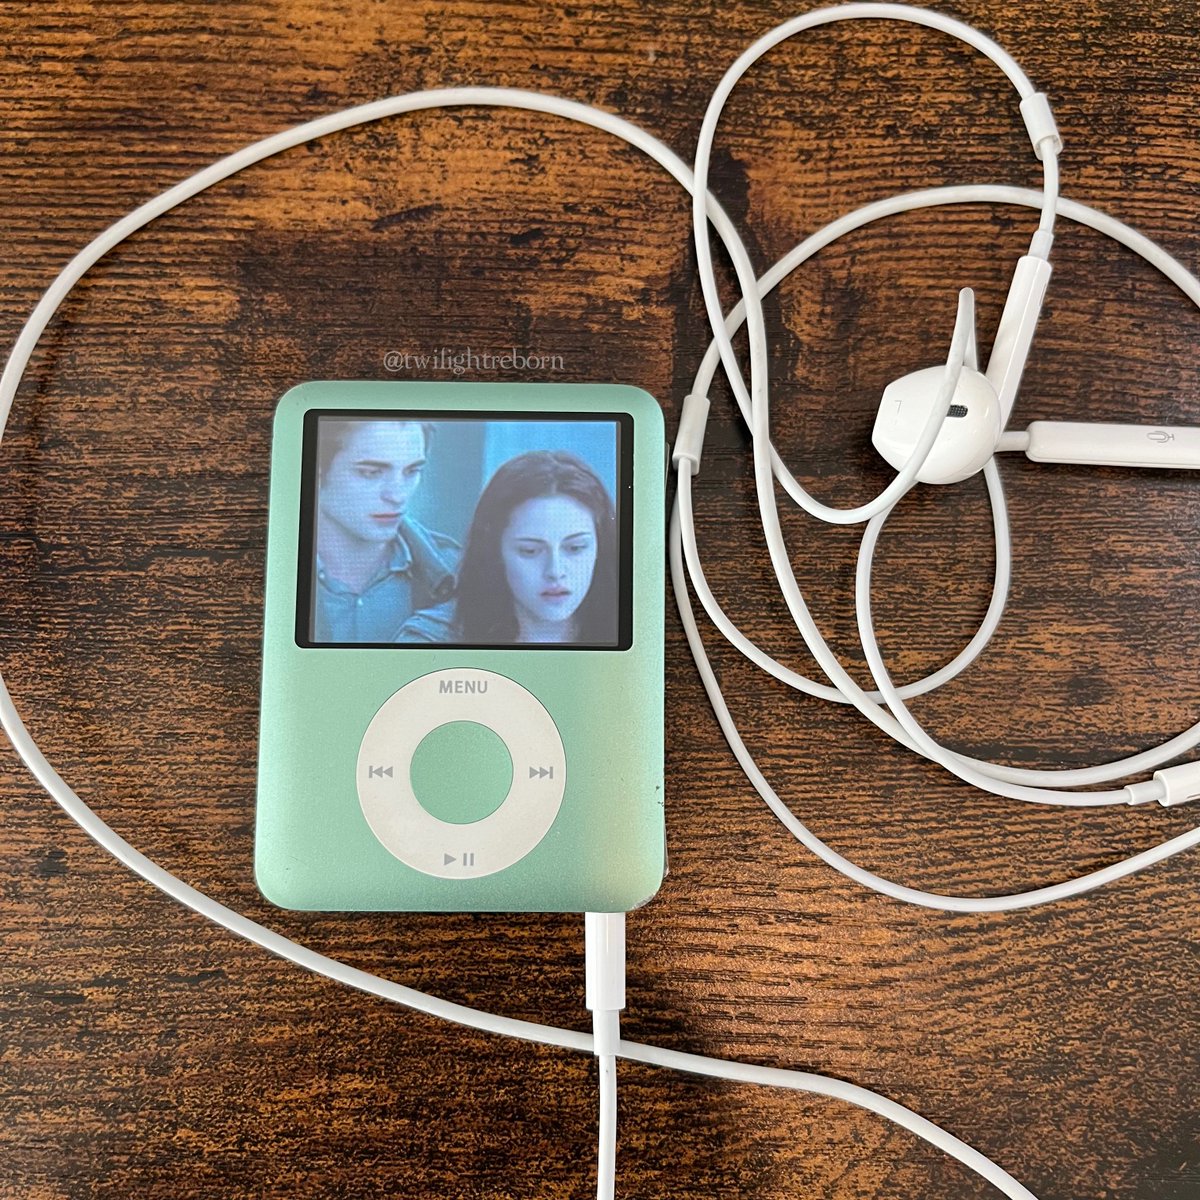 what if we watch twilight together on the ipod nano?